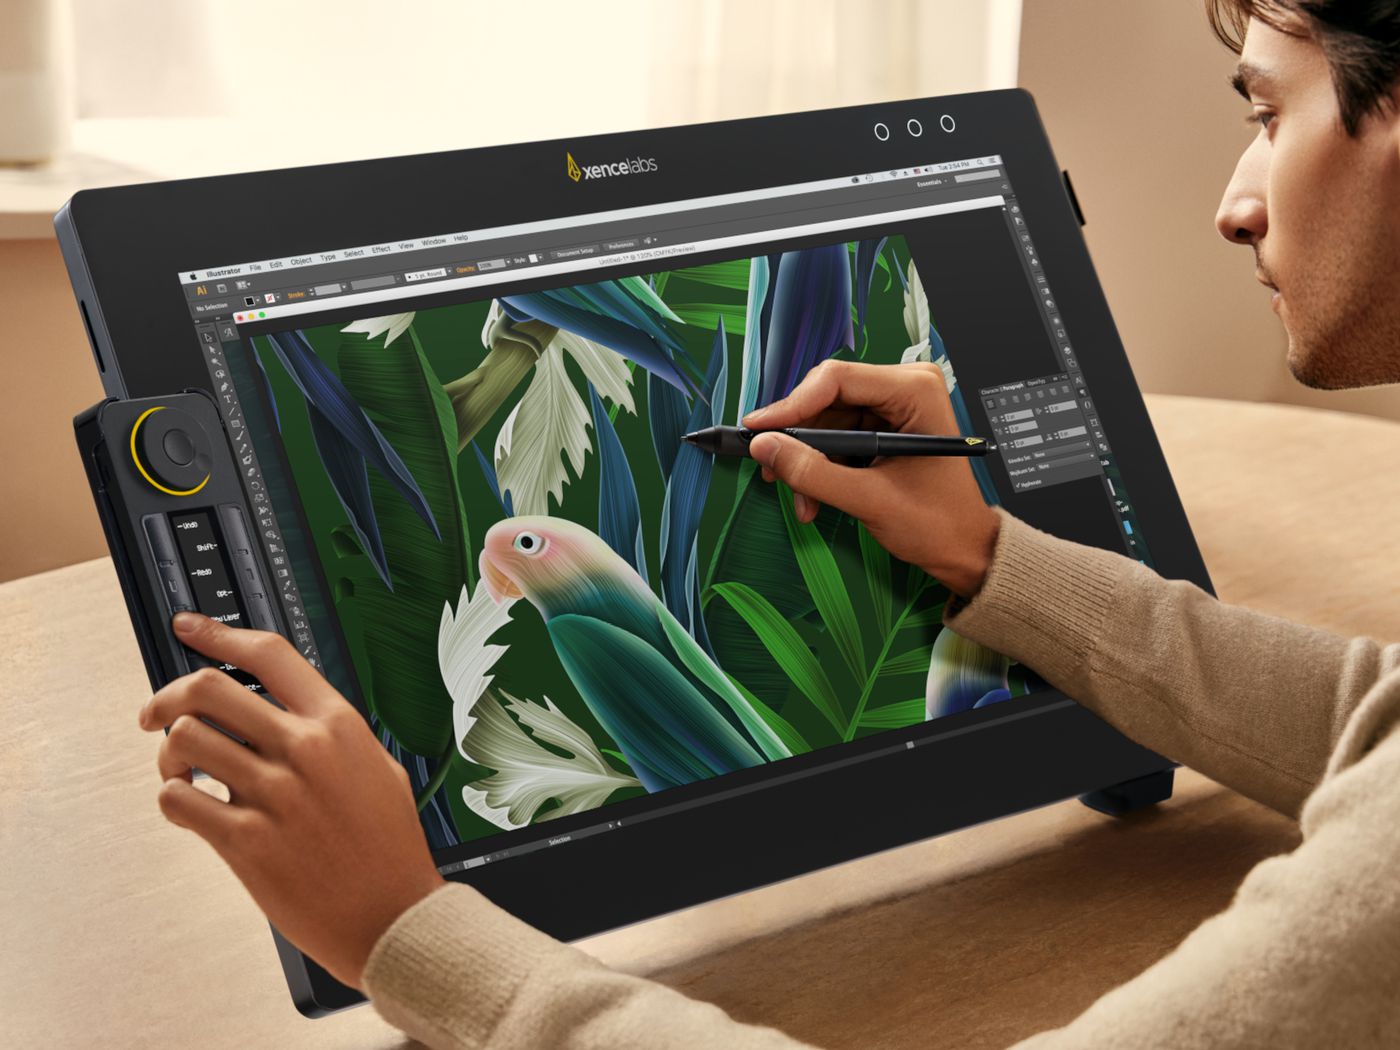 Xencelabs Pen Display 24: The Budget-Friendly Alternative To Wacom’s Big-Screen Drawing Tablets